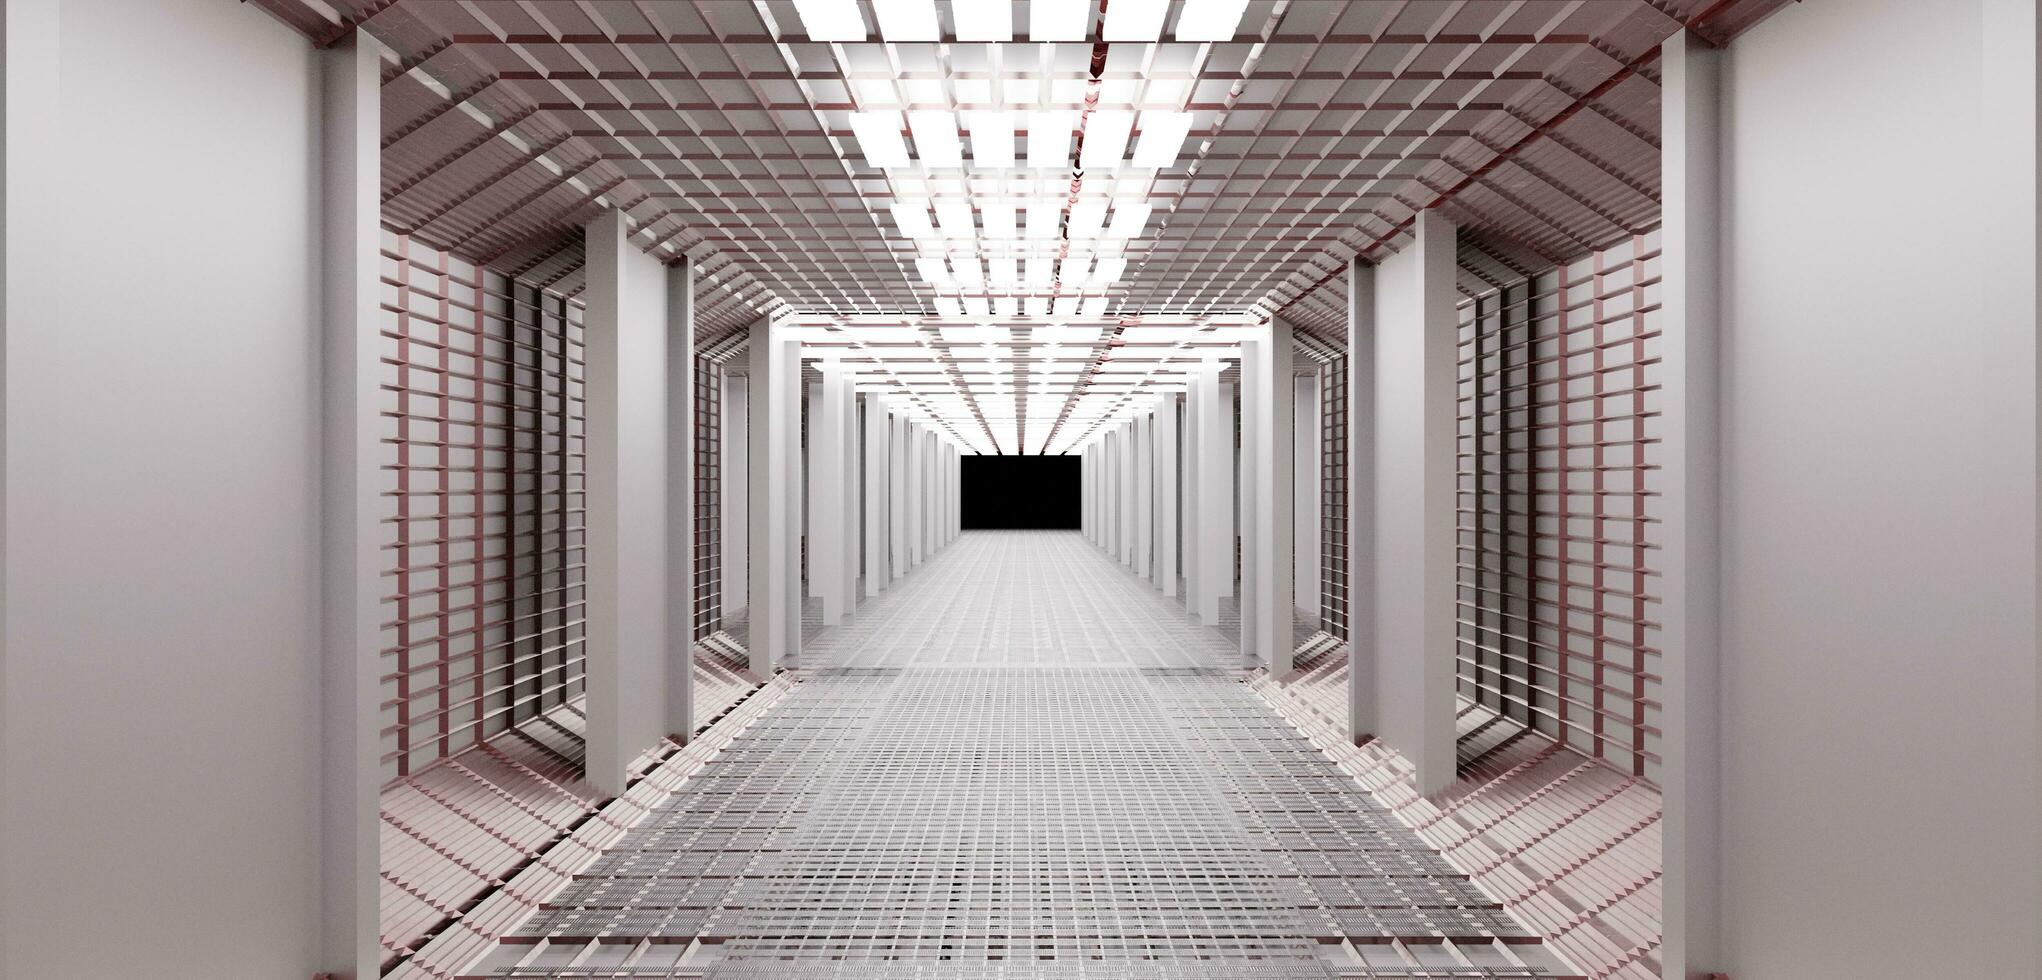 Showroom Futuristic Modern Tunnel Pipeline Technology Floor and Walls of Futuristic Space and Exhibition Room Sci Fi Corridor Room 3D Illustration photo